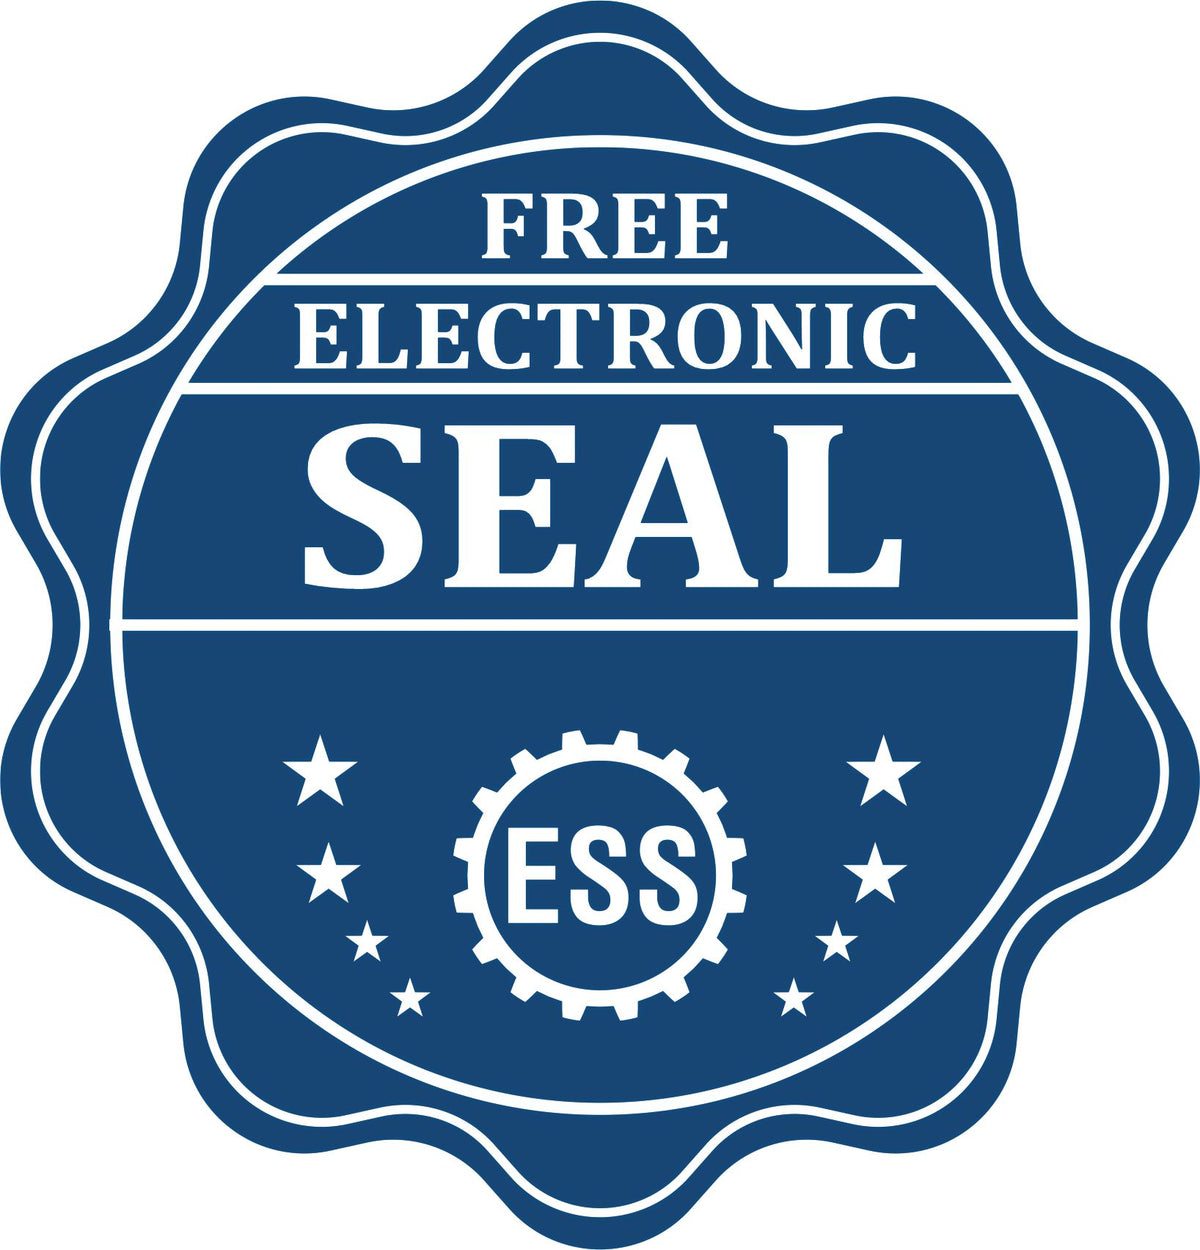 A badge showing a free electronic seal for the Kansas Desk Architect Embossing Seal with stars and the ESS gear on the emblem.